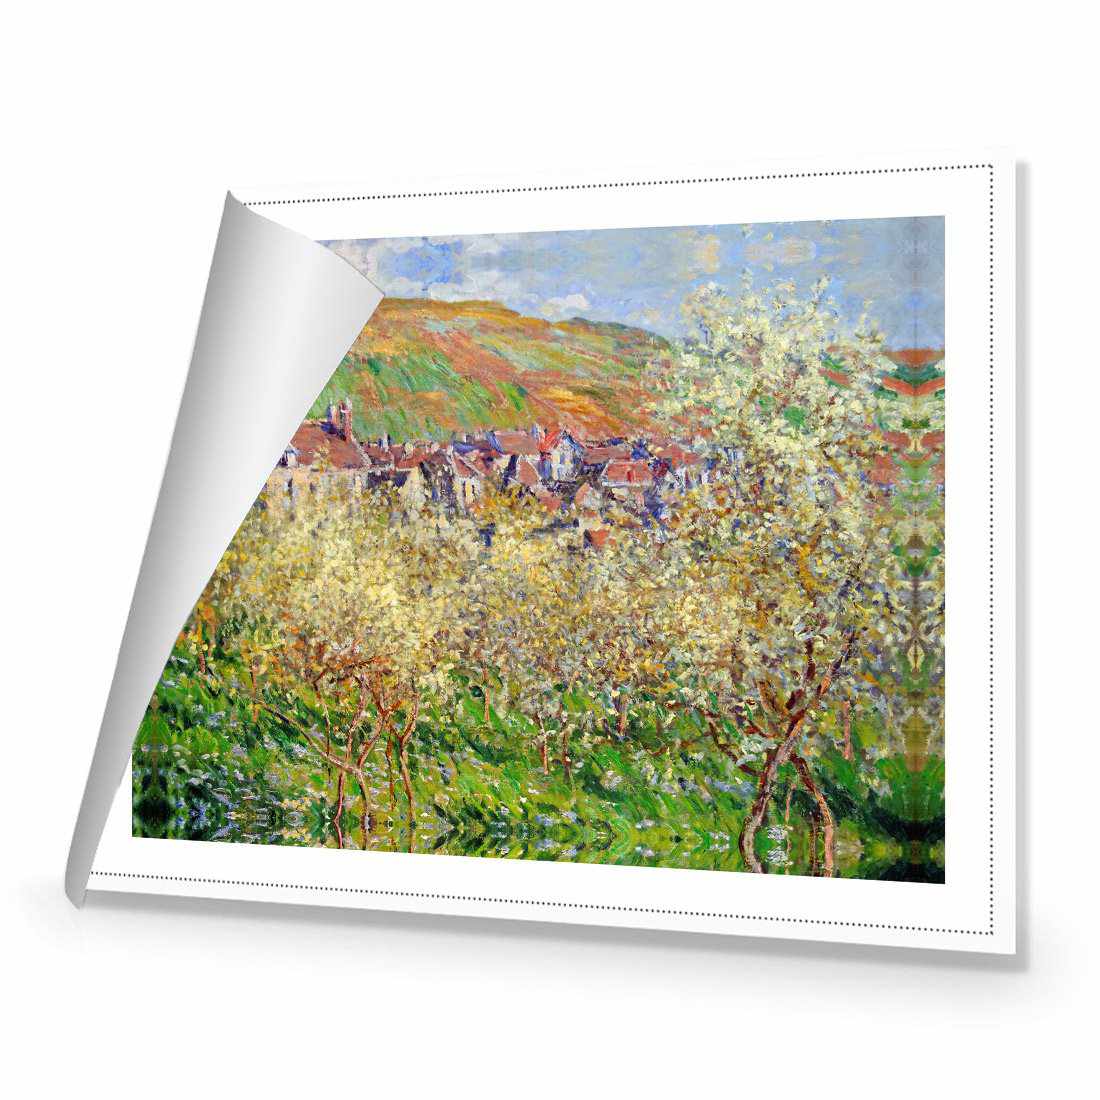 Plum Trees in Blossom - Monet Canvas Art-Canvas-Wall Art Designs-45x30cm-Rolled Canvas-Wall Art Designs